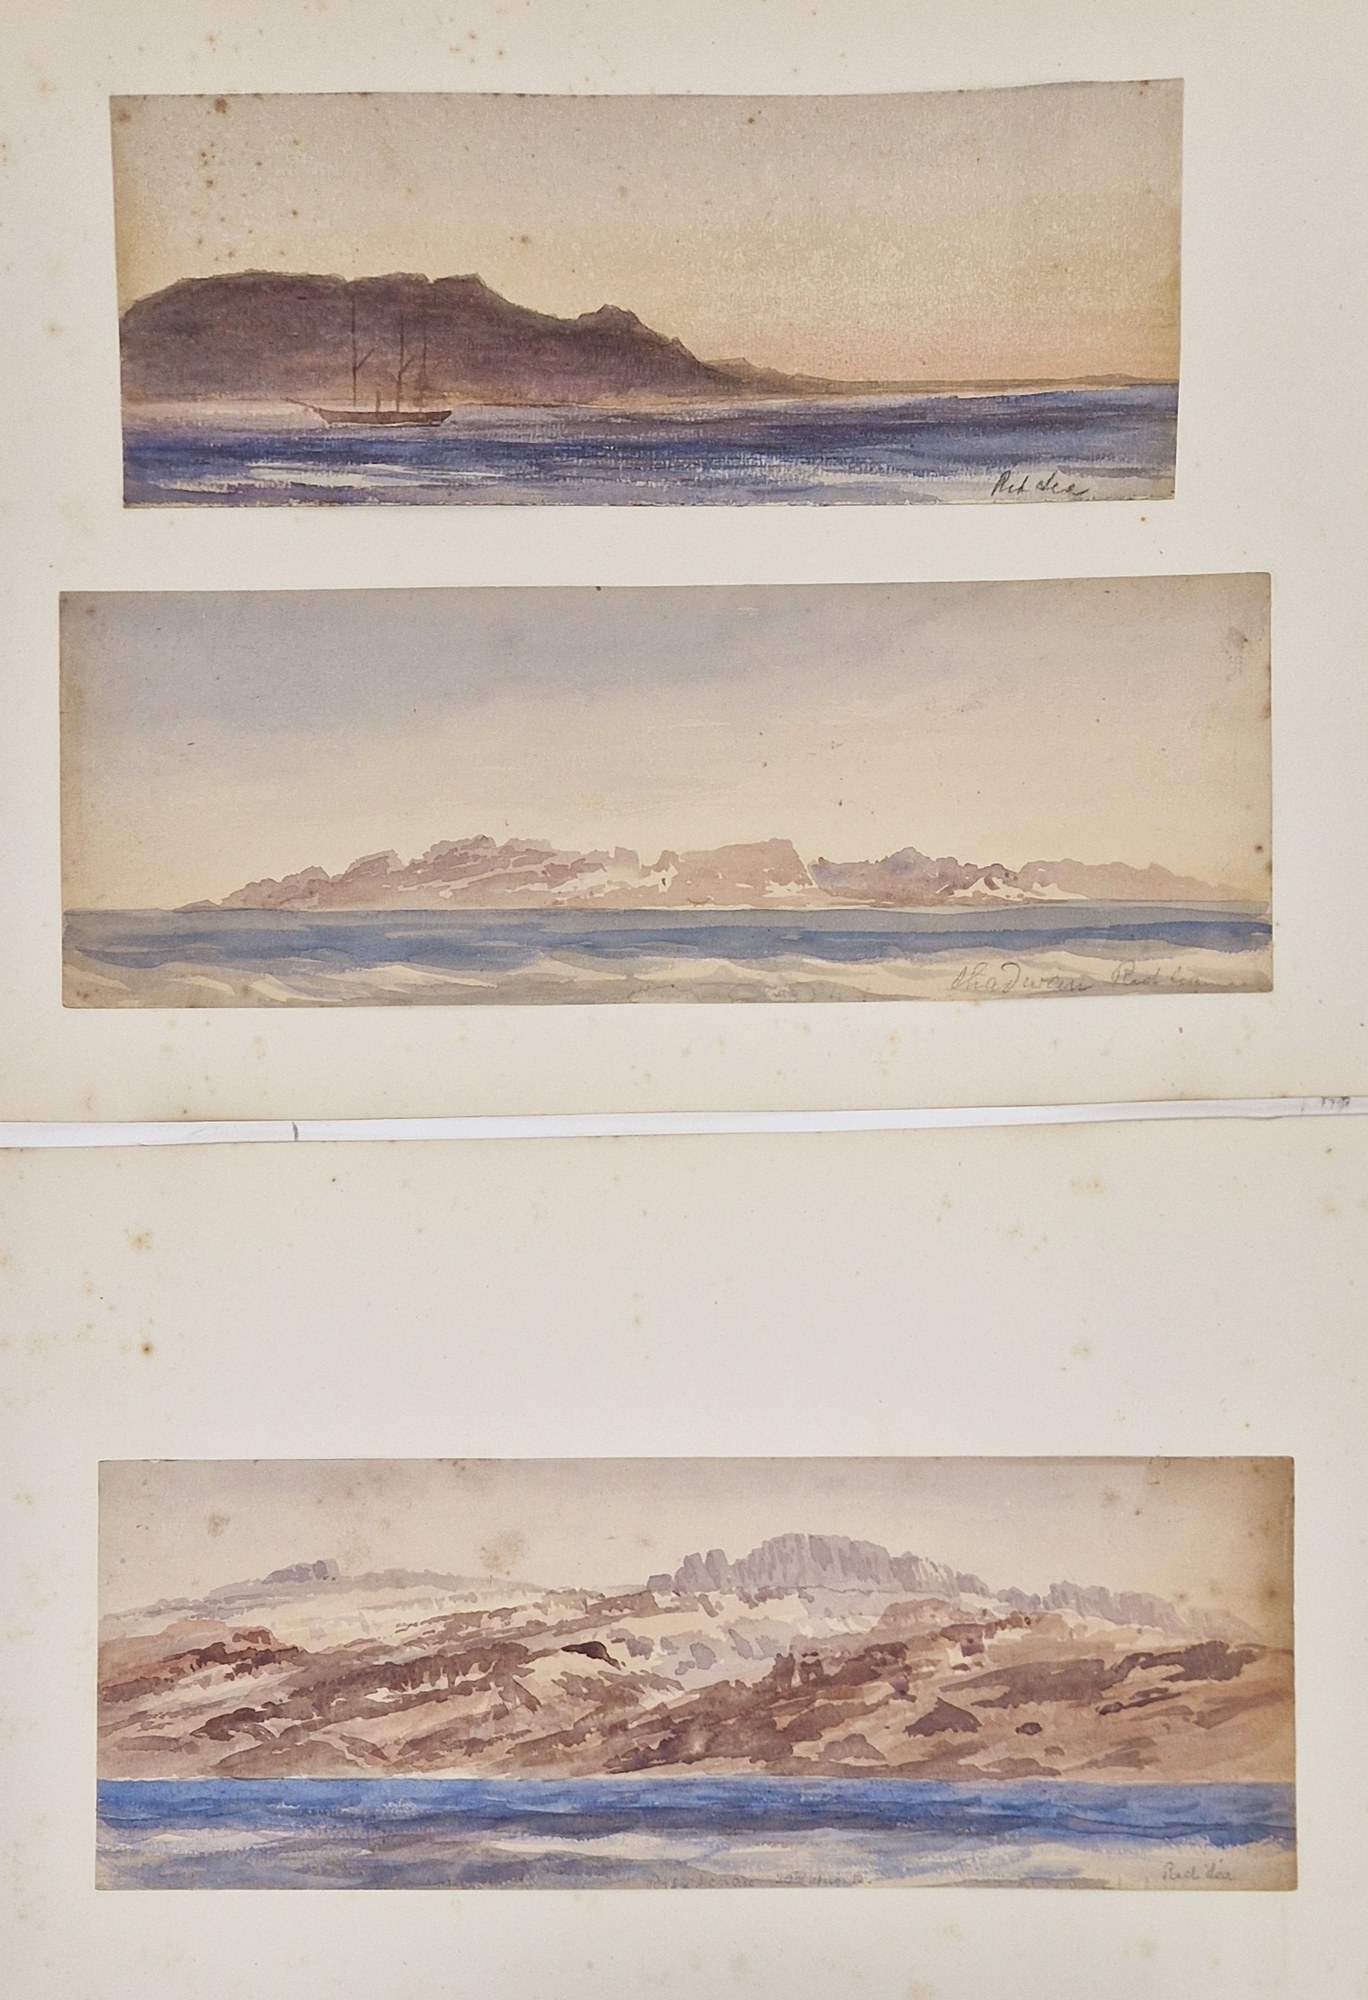 Watercolour drawings - collection Attrib. A H. Walter " A Passage from India to England 1873" - Image 6 of 13